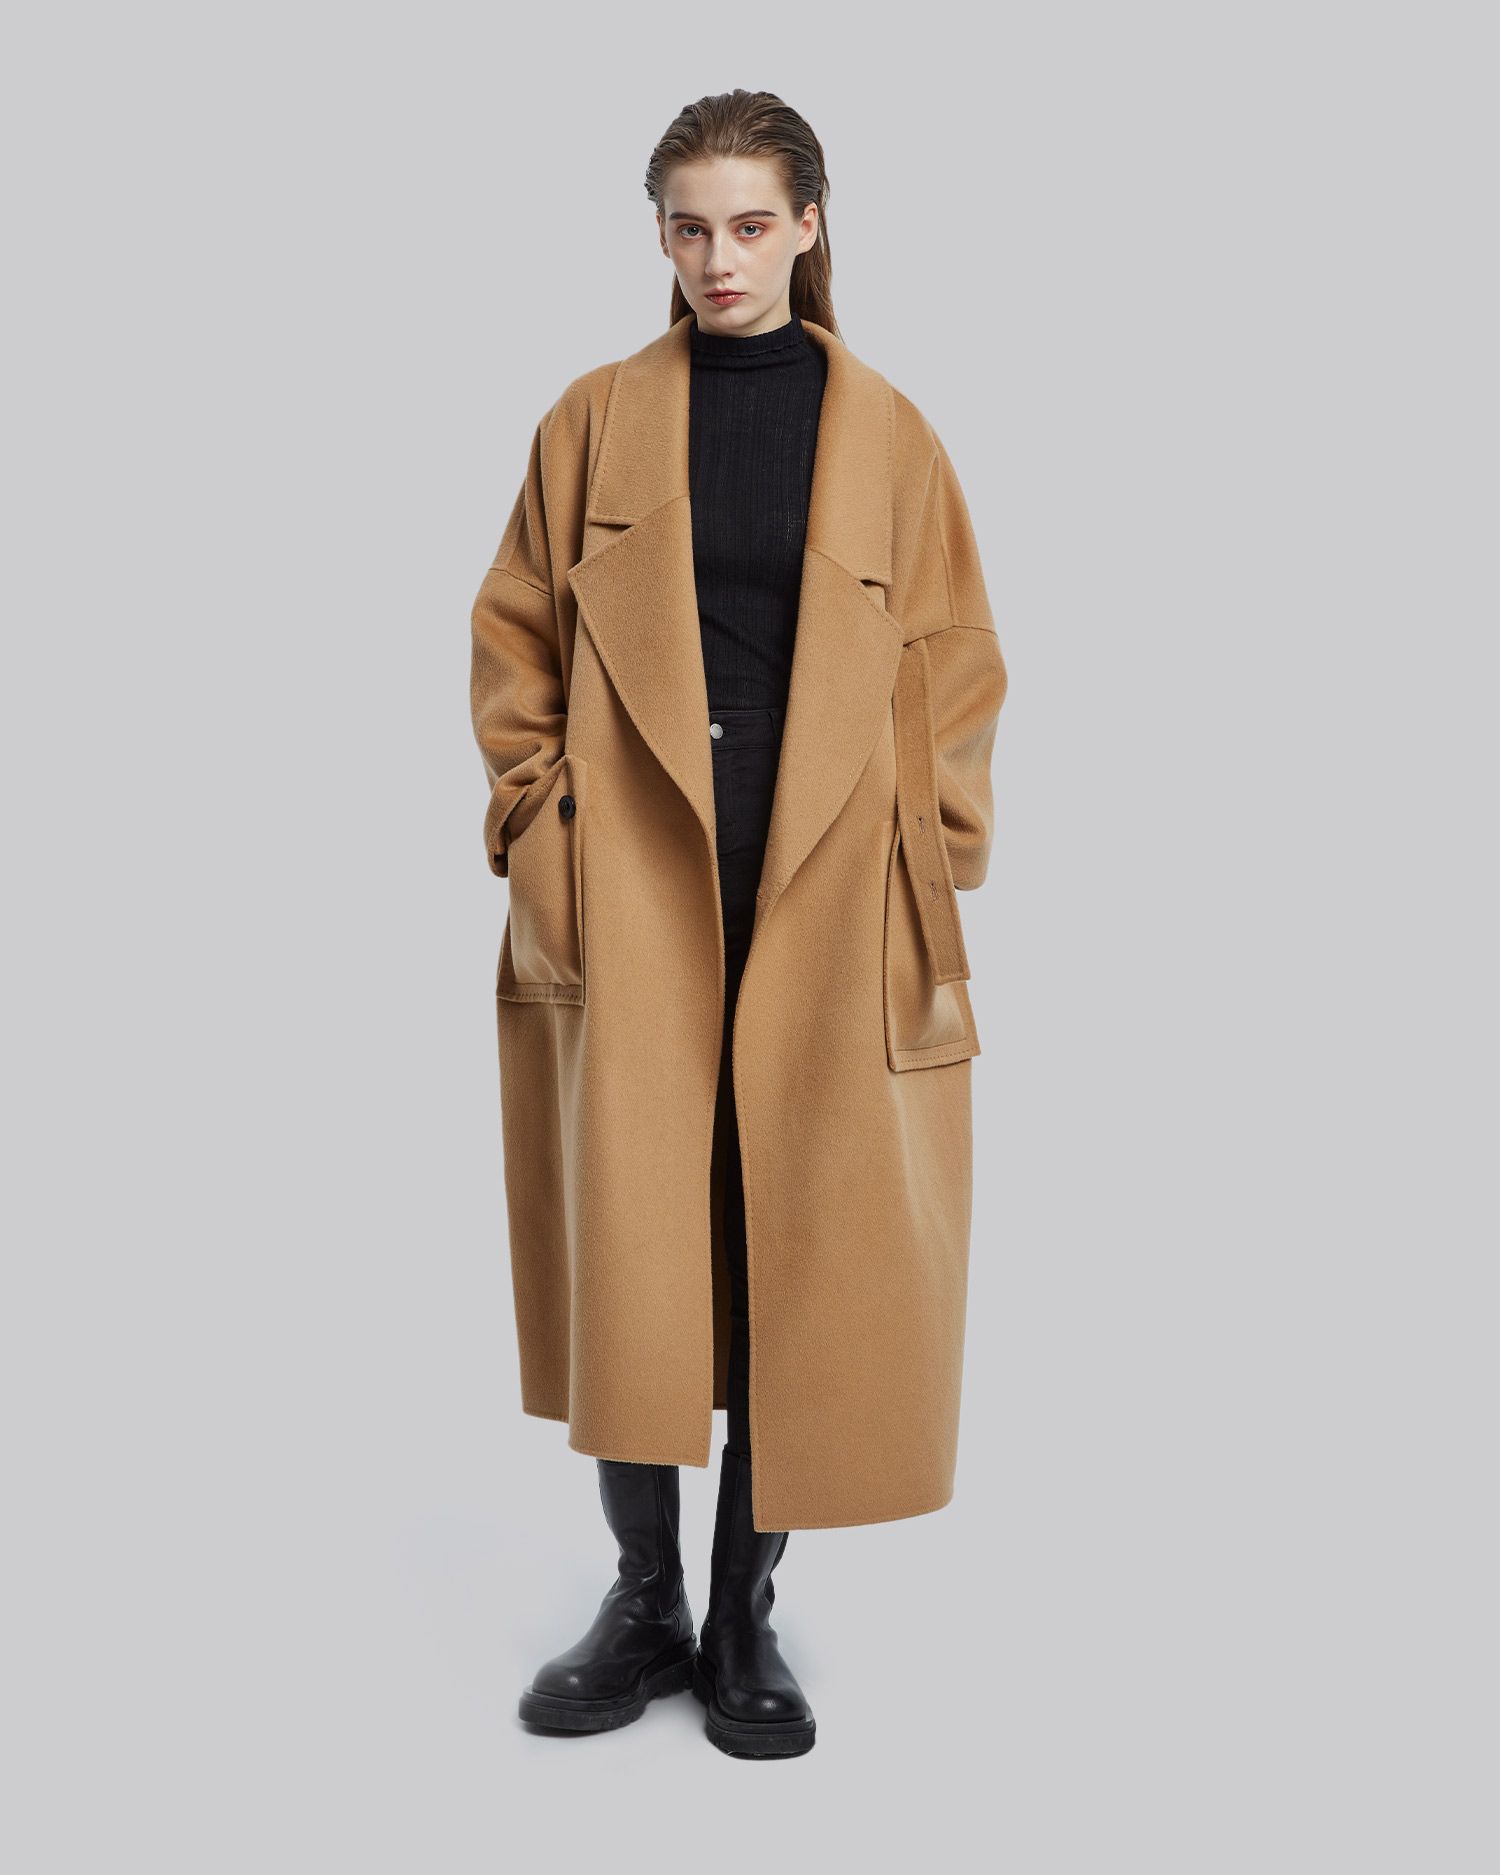 Long Wool Coat with Ribbons | Deptanonym